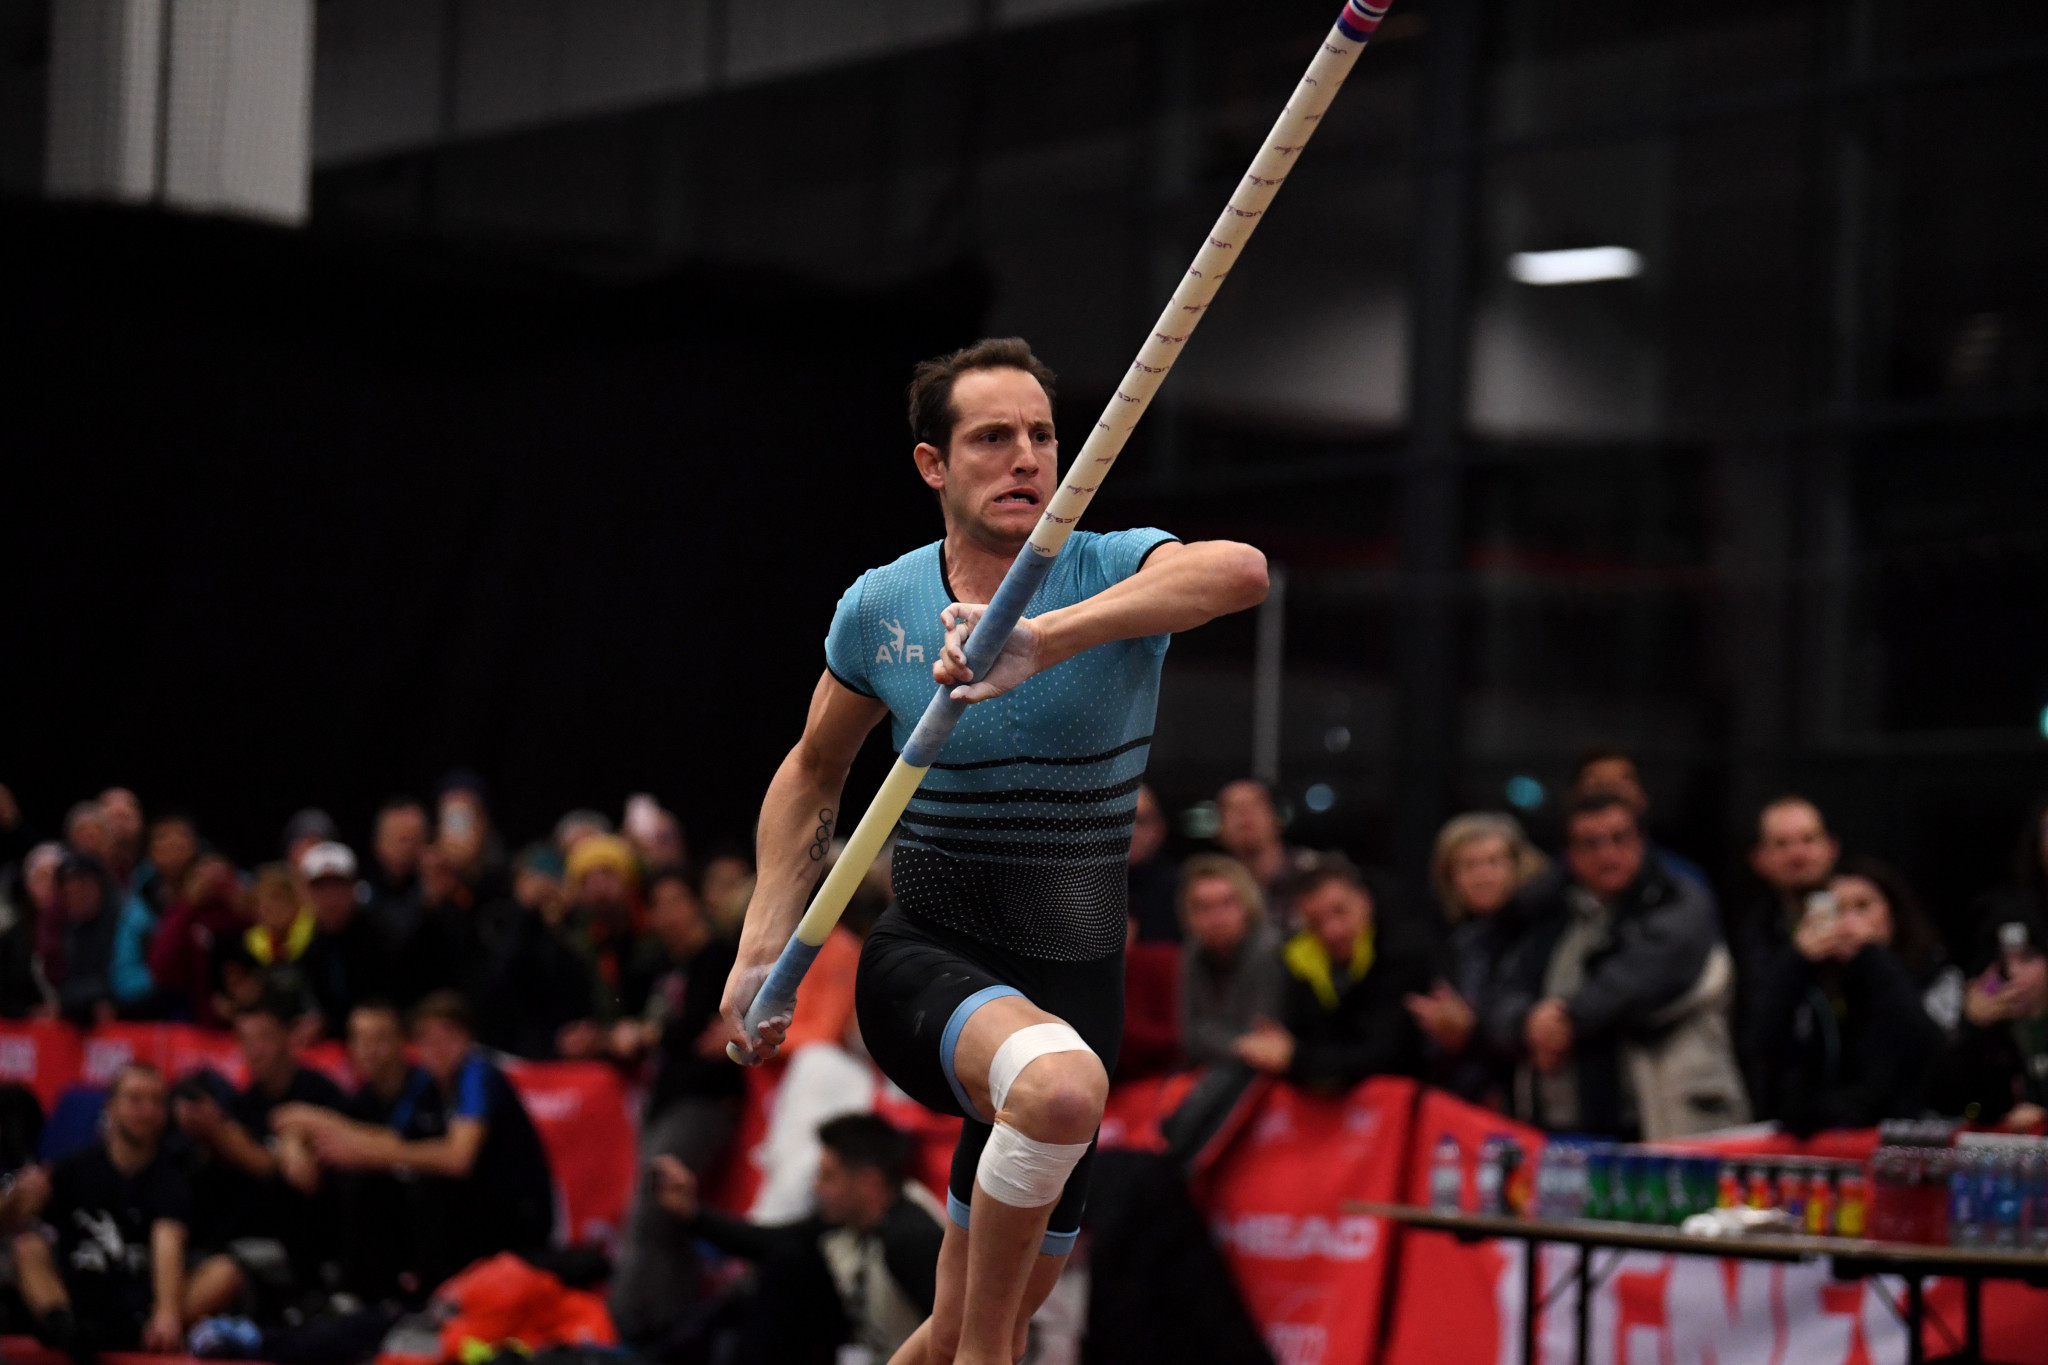 Lavillenie brothers claim one-two finish at World Athletics Indoor Tour in Karlsruhe